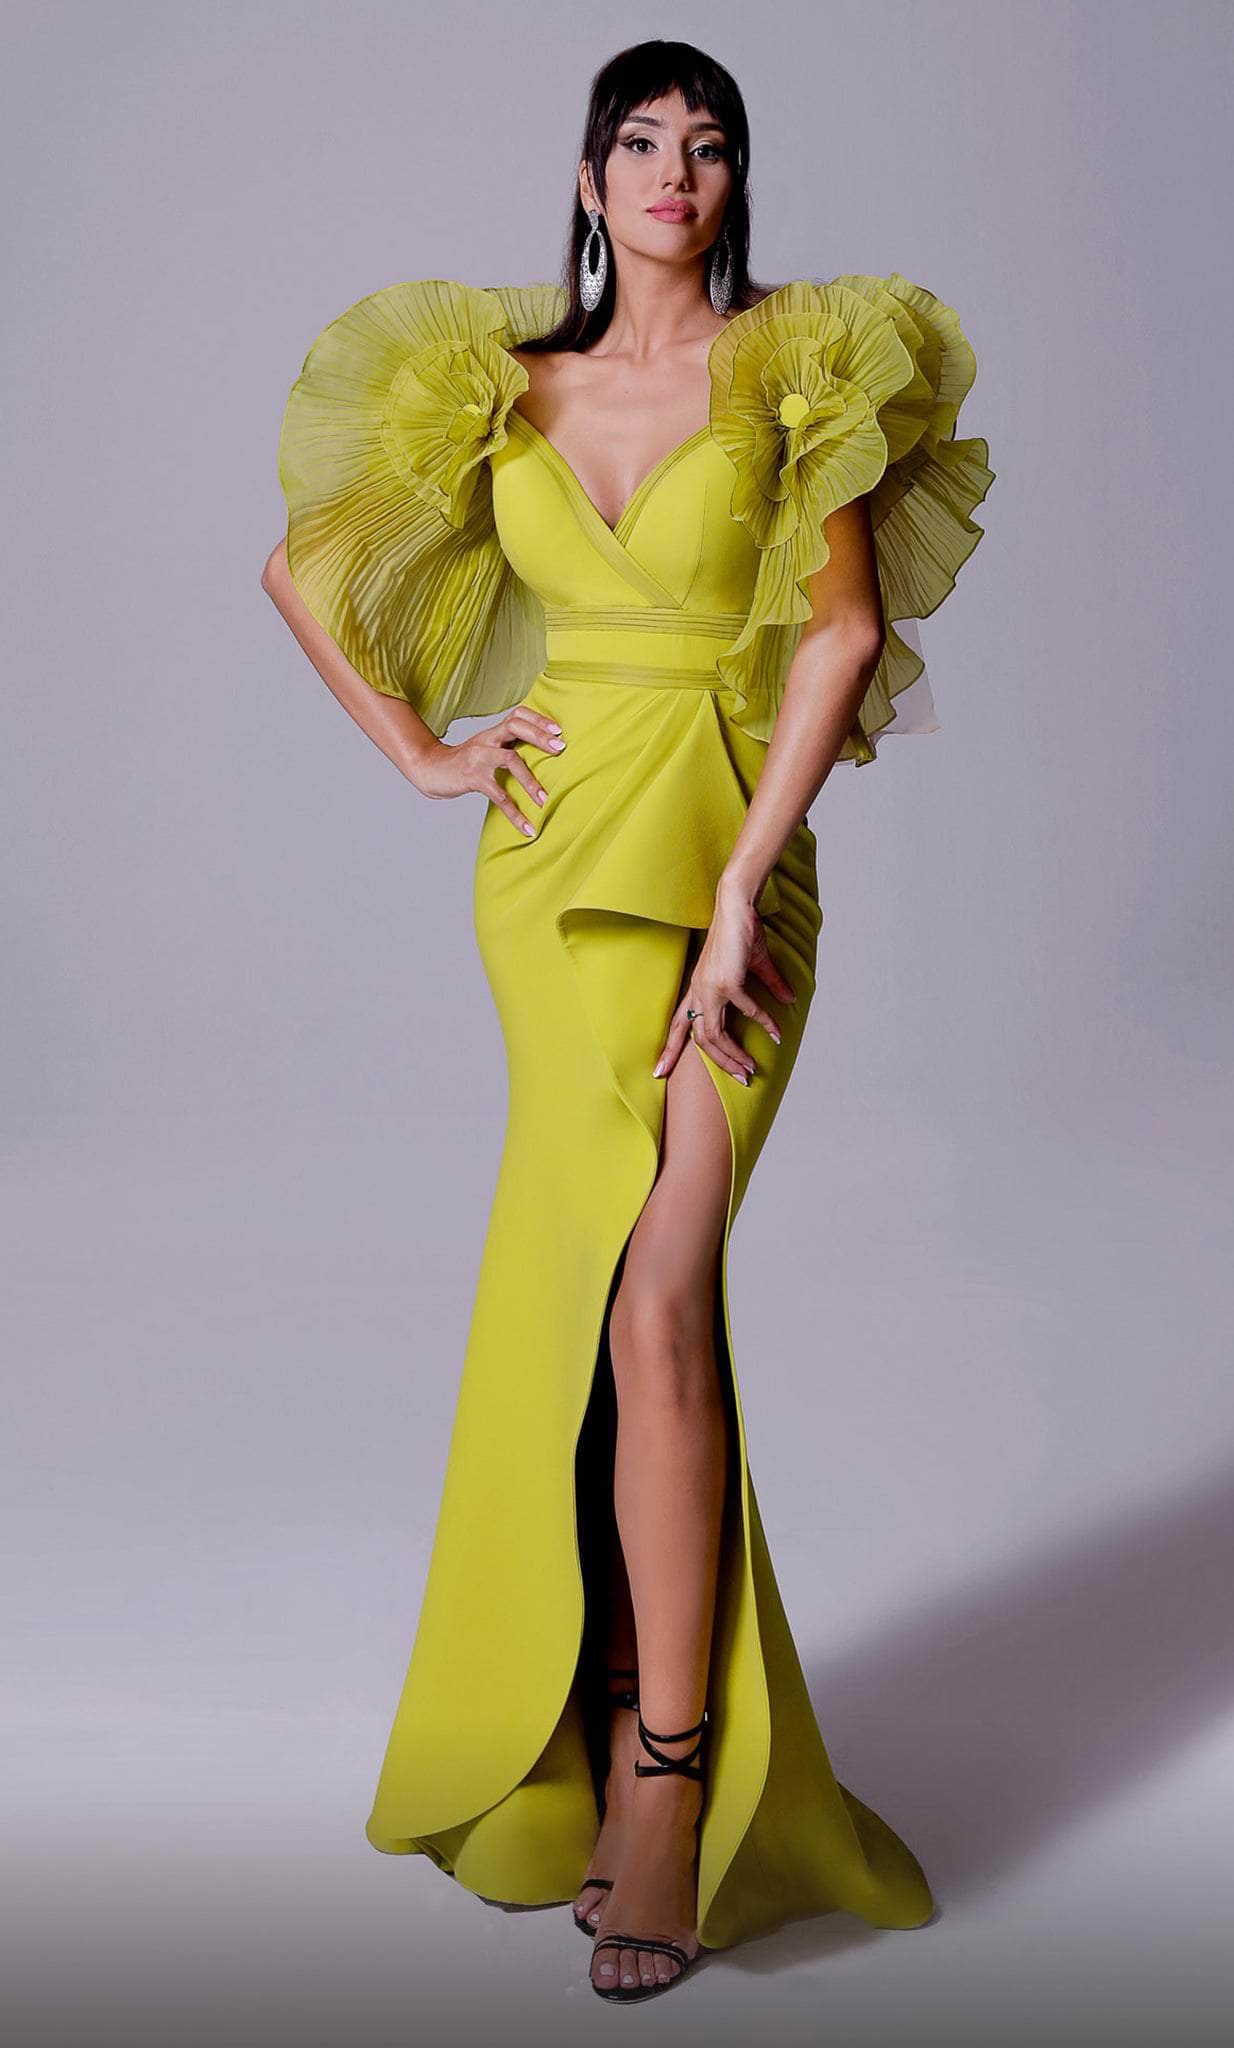 Image of MNM Couture 2712 - Ruffle Sleeve Evening Gown